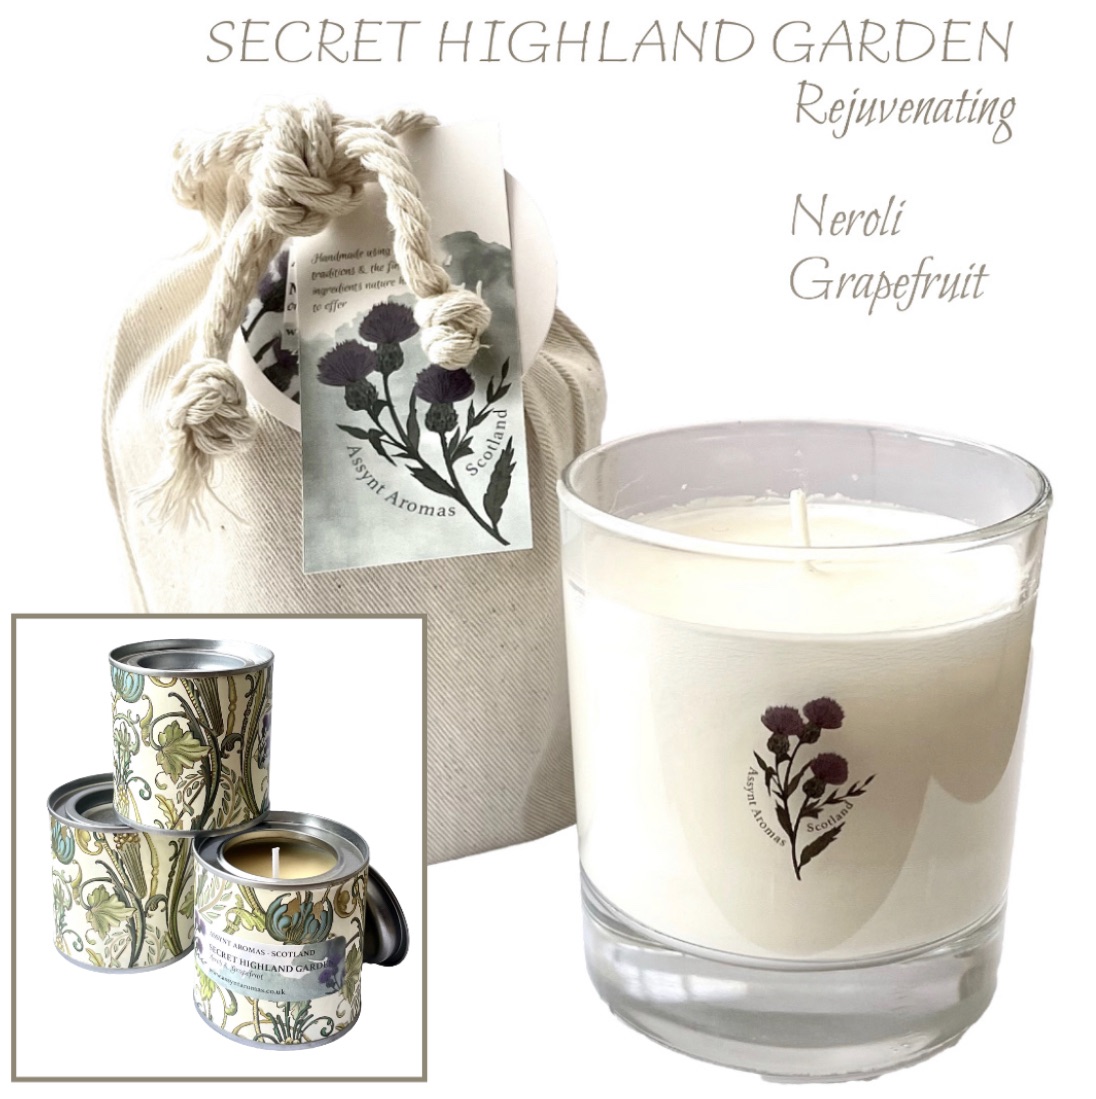 SECRET HIGHLAND GARDEN - natural essence aromatherapy plant wax candle with